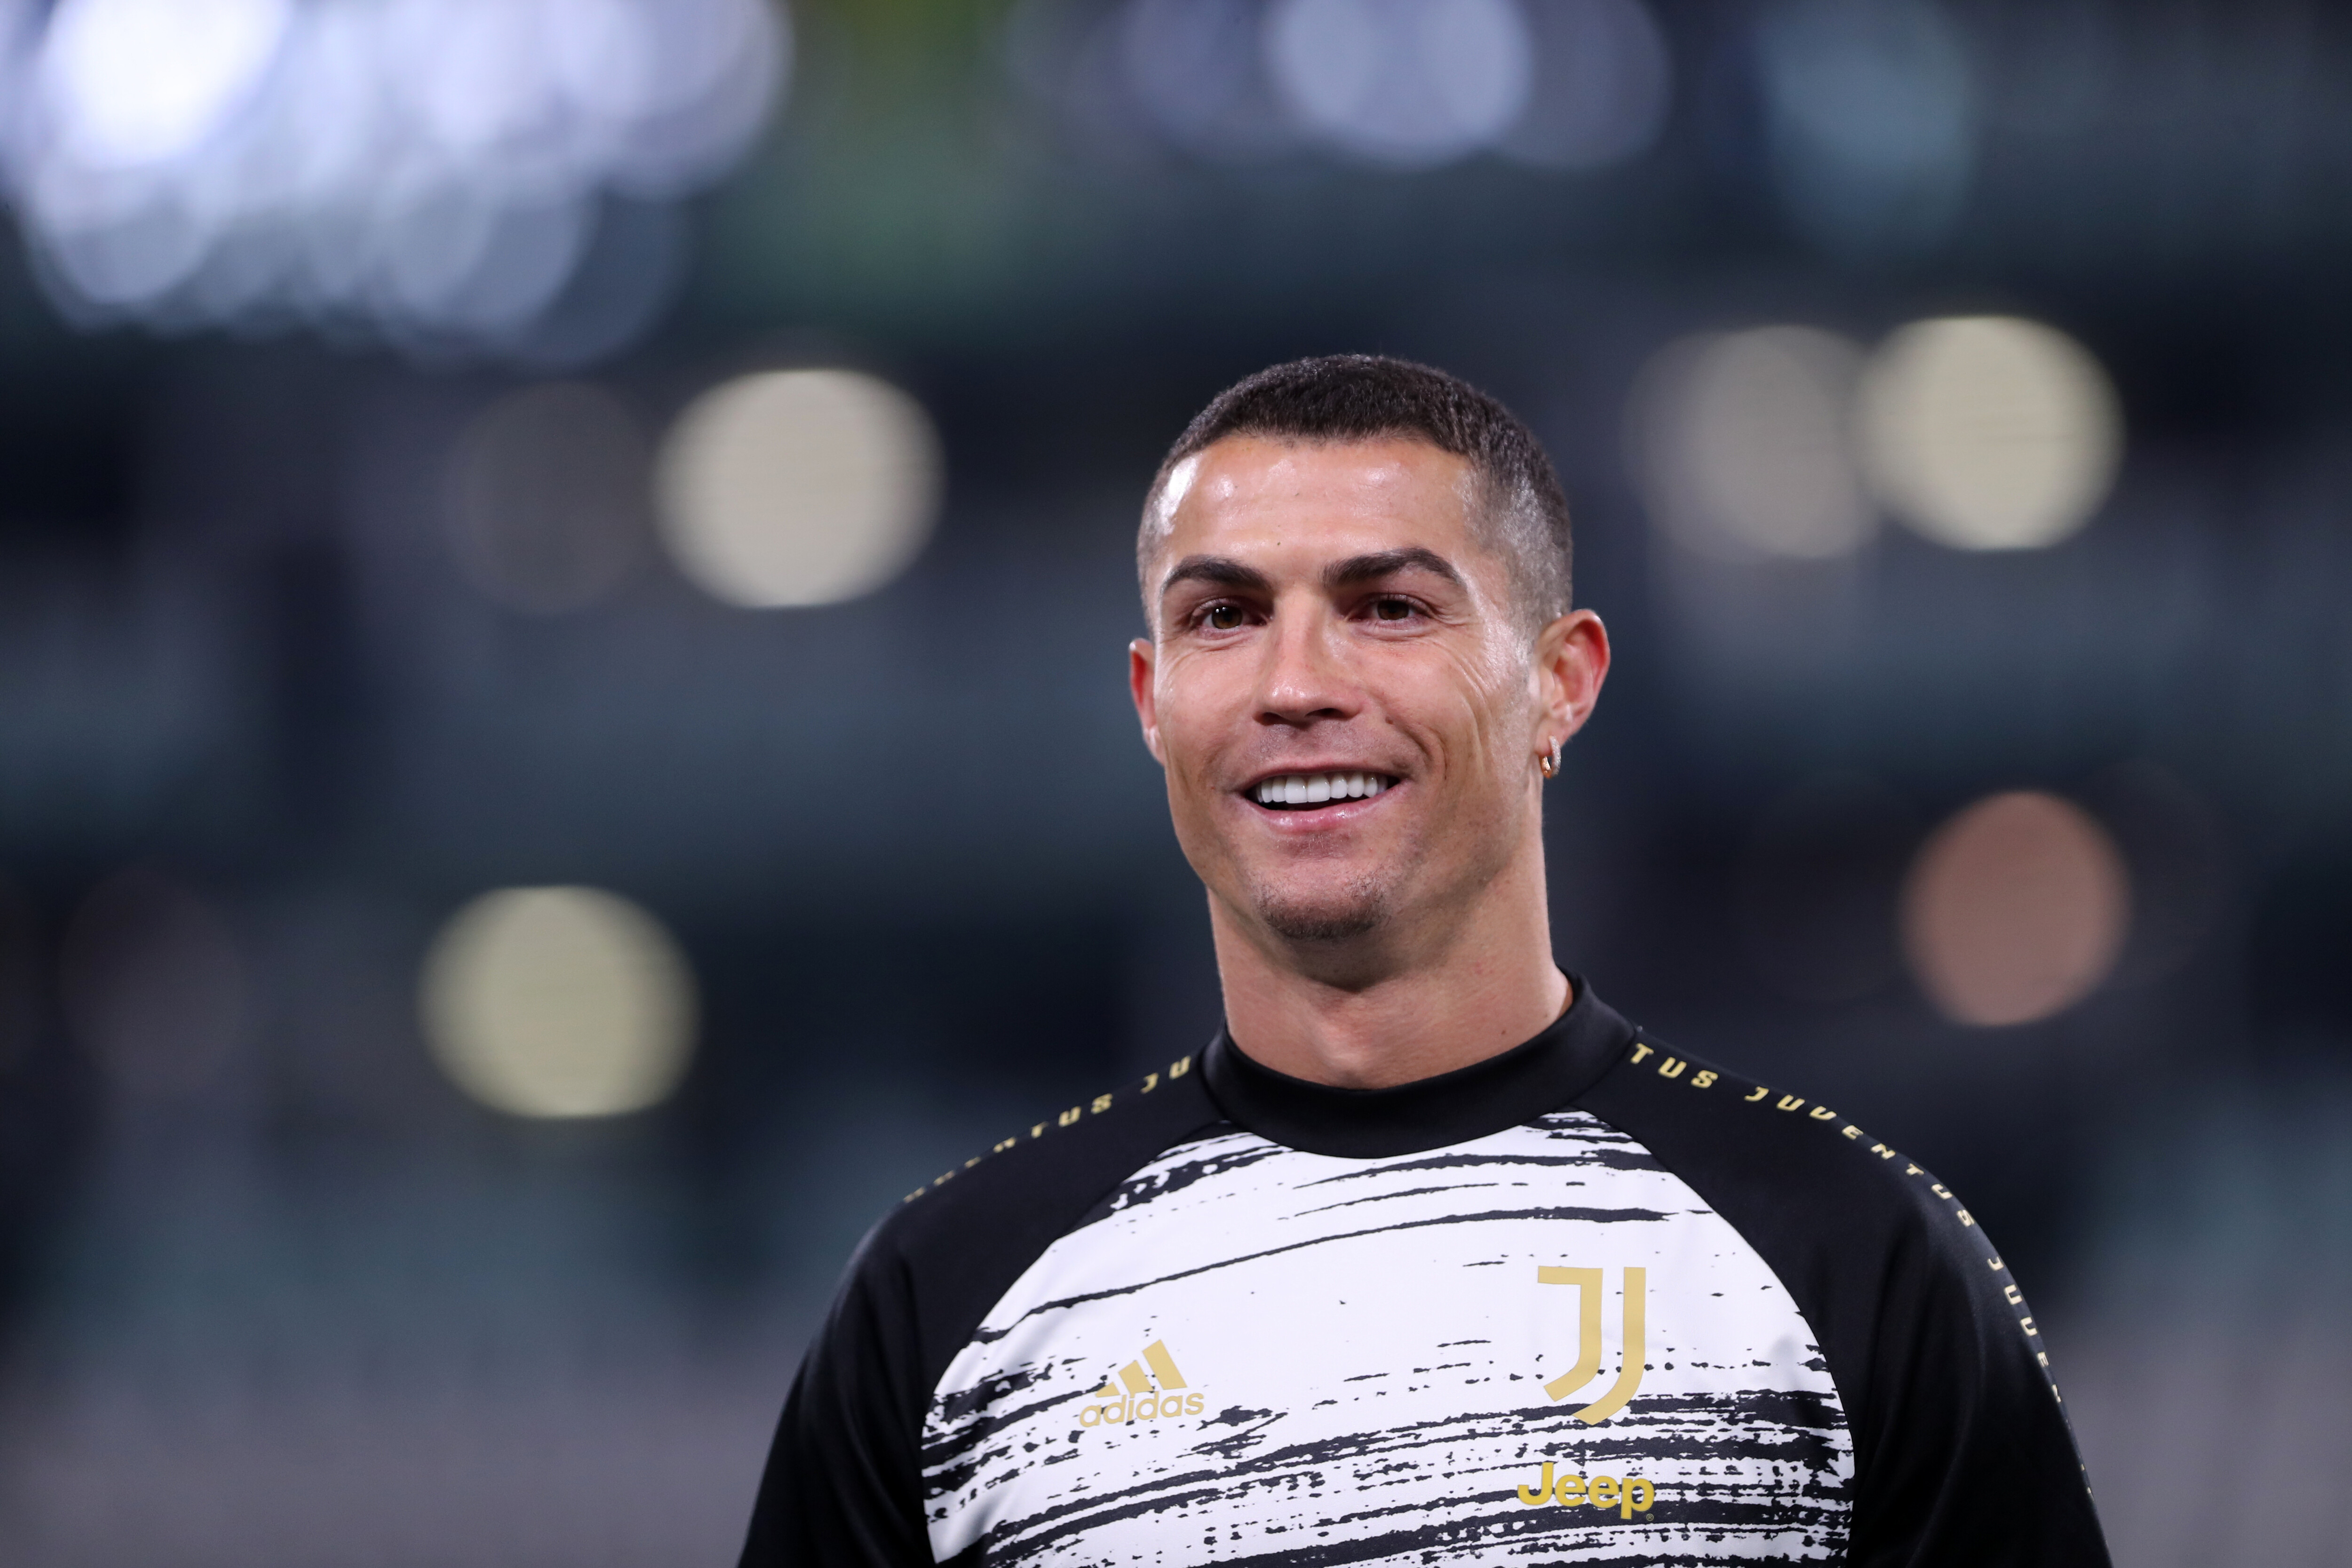 Cristiano Ronaldo’s Sleeping Habits Are Nearly Impossible for ‘Regular People’